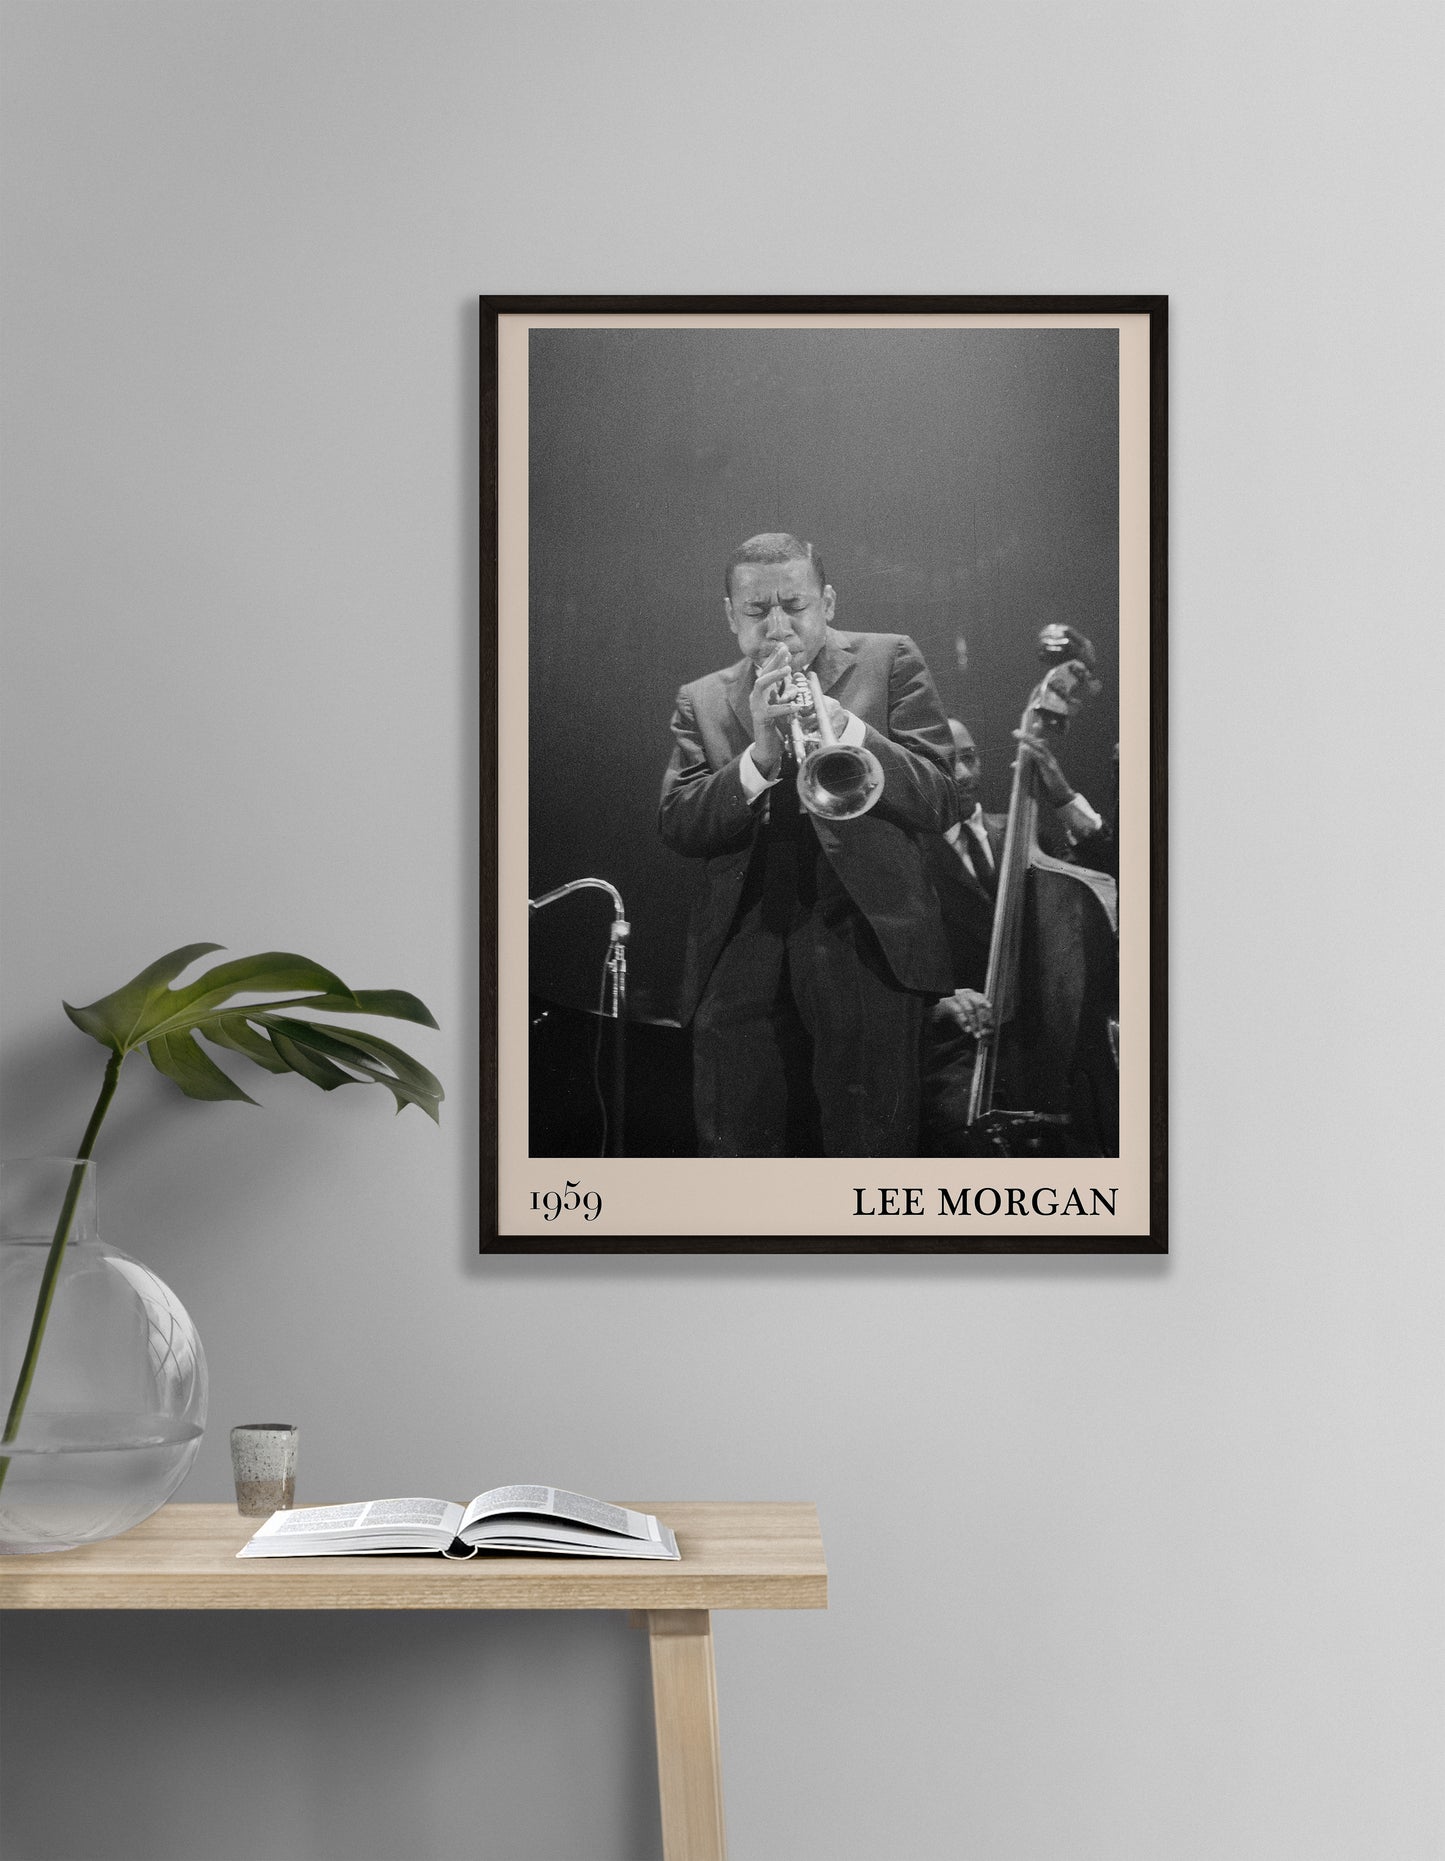 1959 photograph of Lee Morgan playing the Trumpet transformed into a stylish black-framed music poster  hanging on a grey bedroom wall